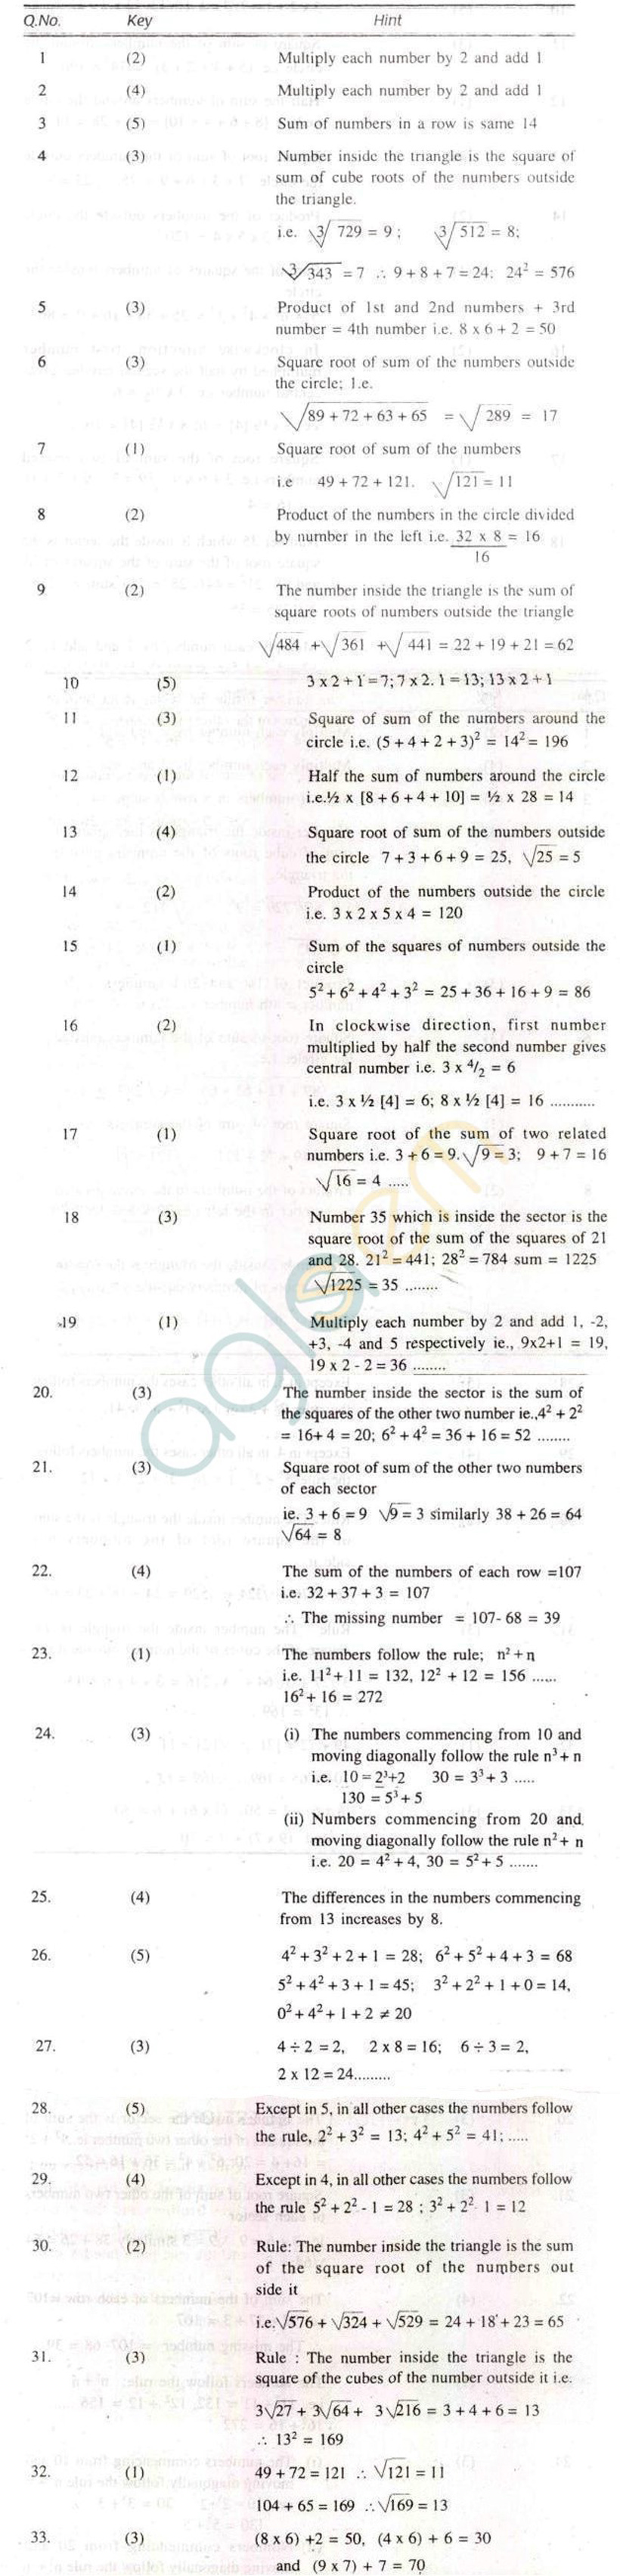 Problems Related to Numbers in Figures